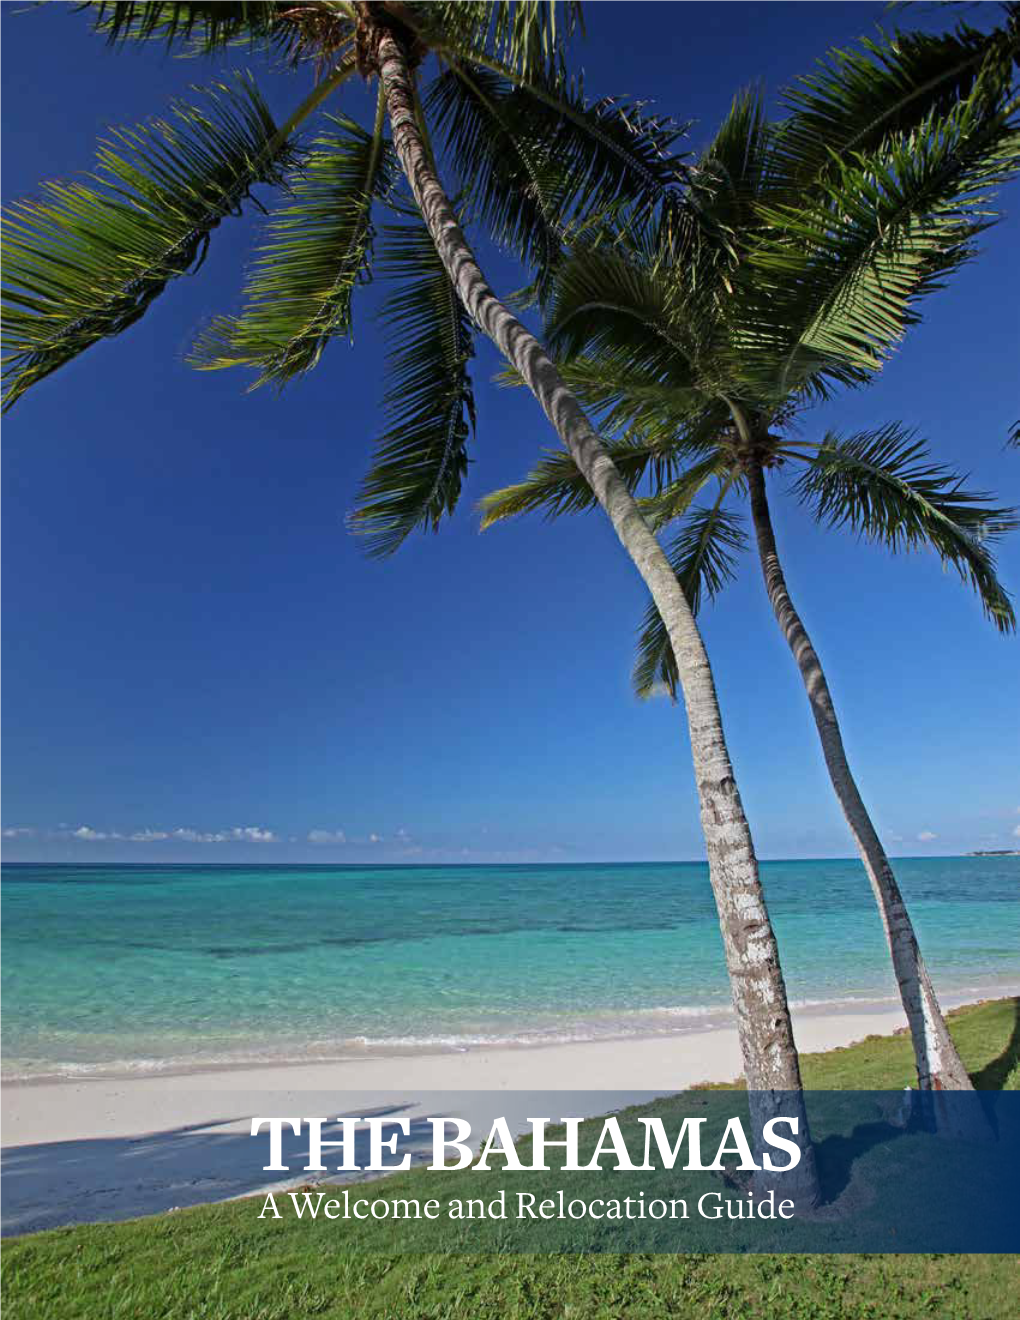 THE BAHAMAS a Welcome and Relocation Guide Quick Facts About the Bahamas